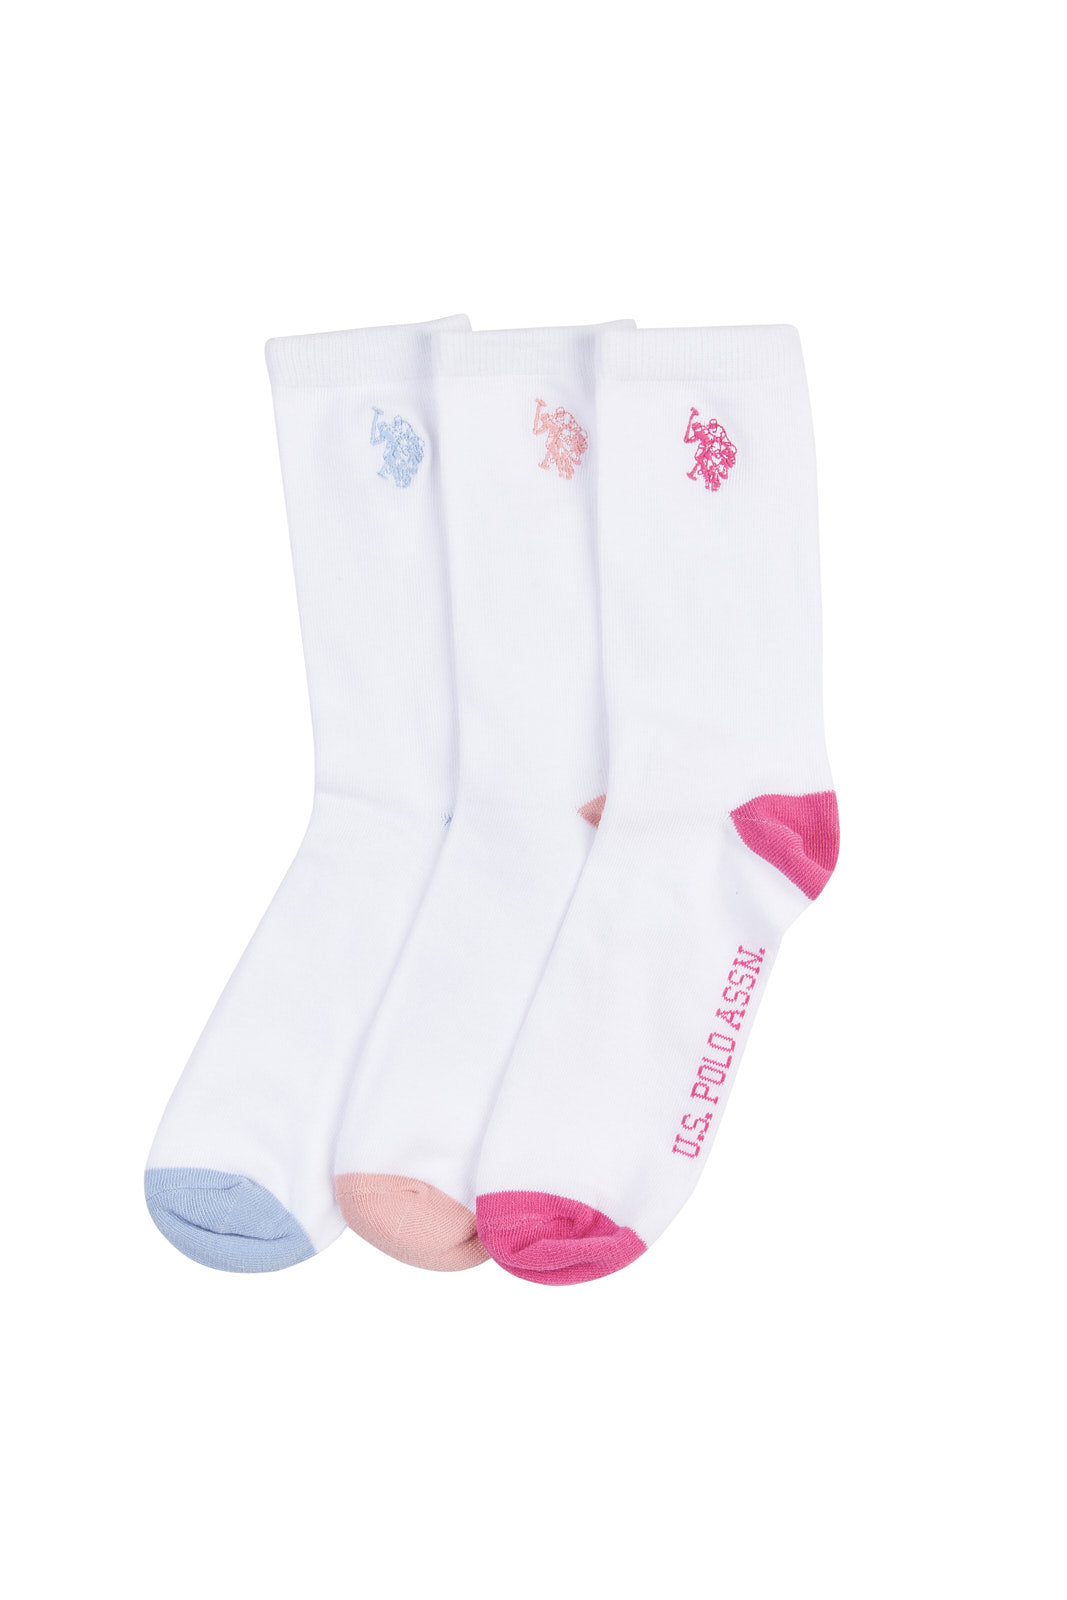 Womens 3 Pack High Contrast Socks in Bright White